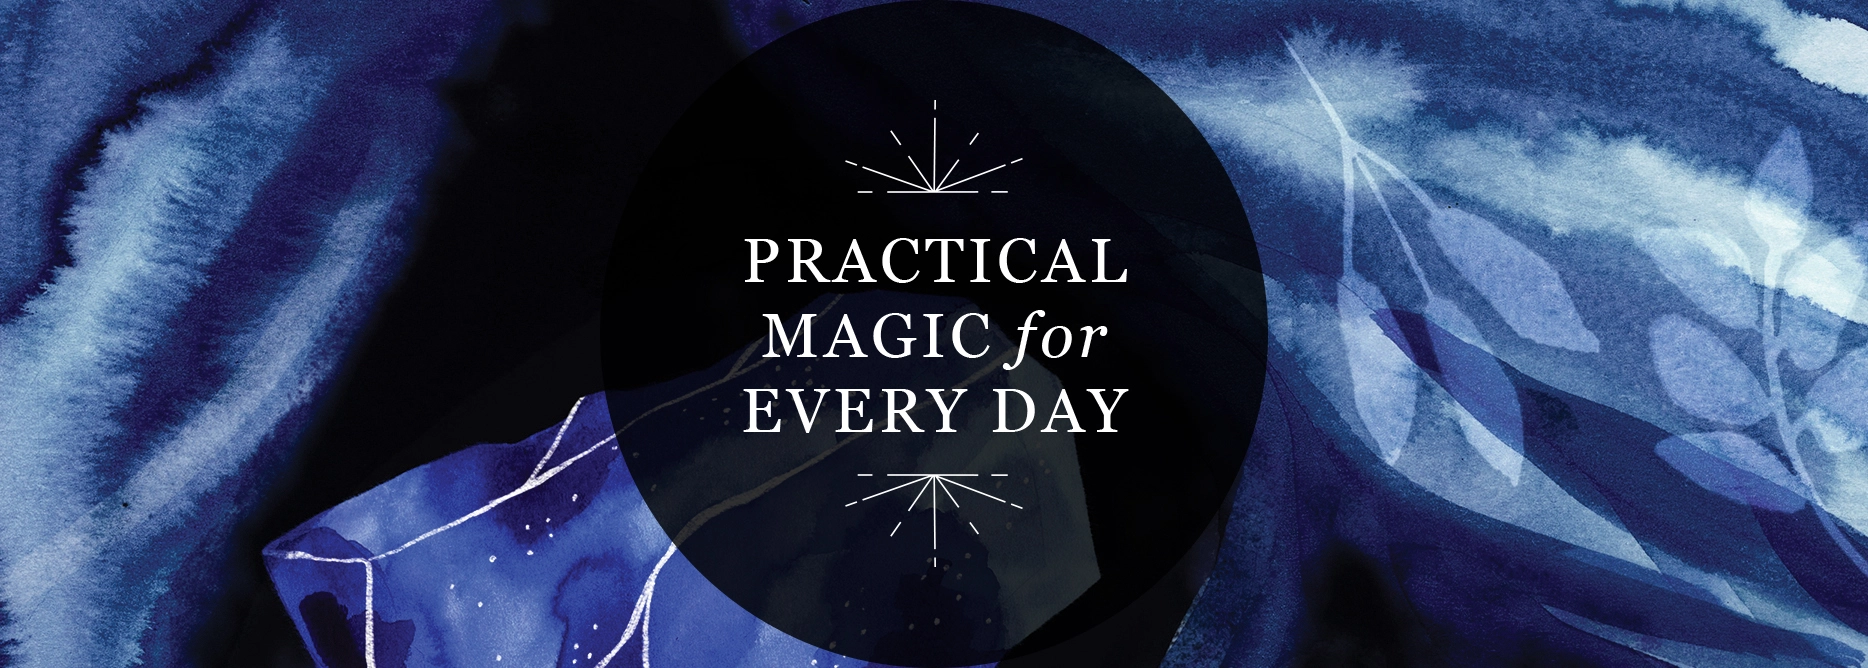 RP Mystic - Illustrated header image that reads 'Practical Magic for Every Day'